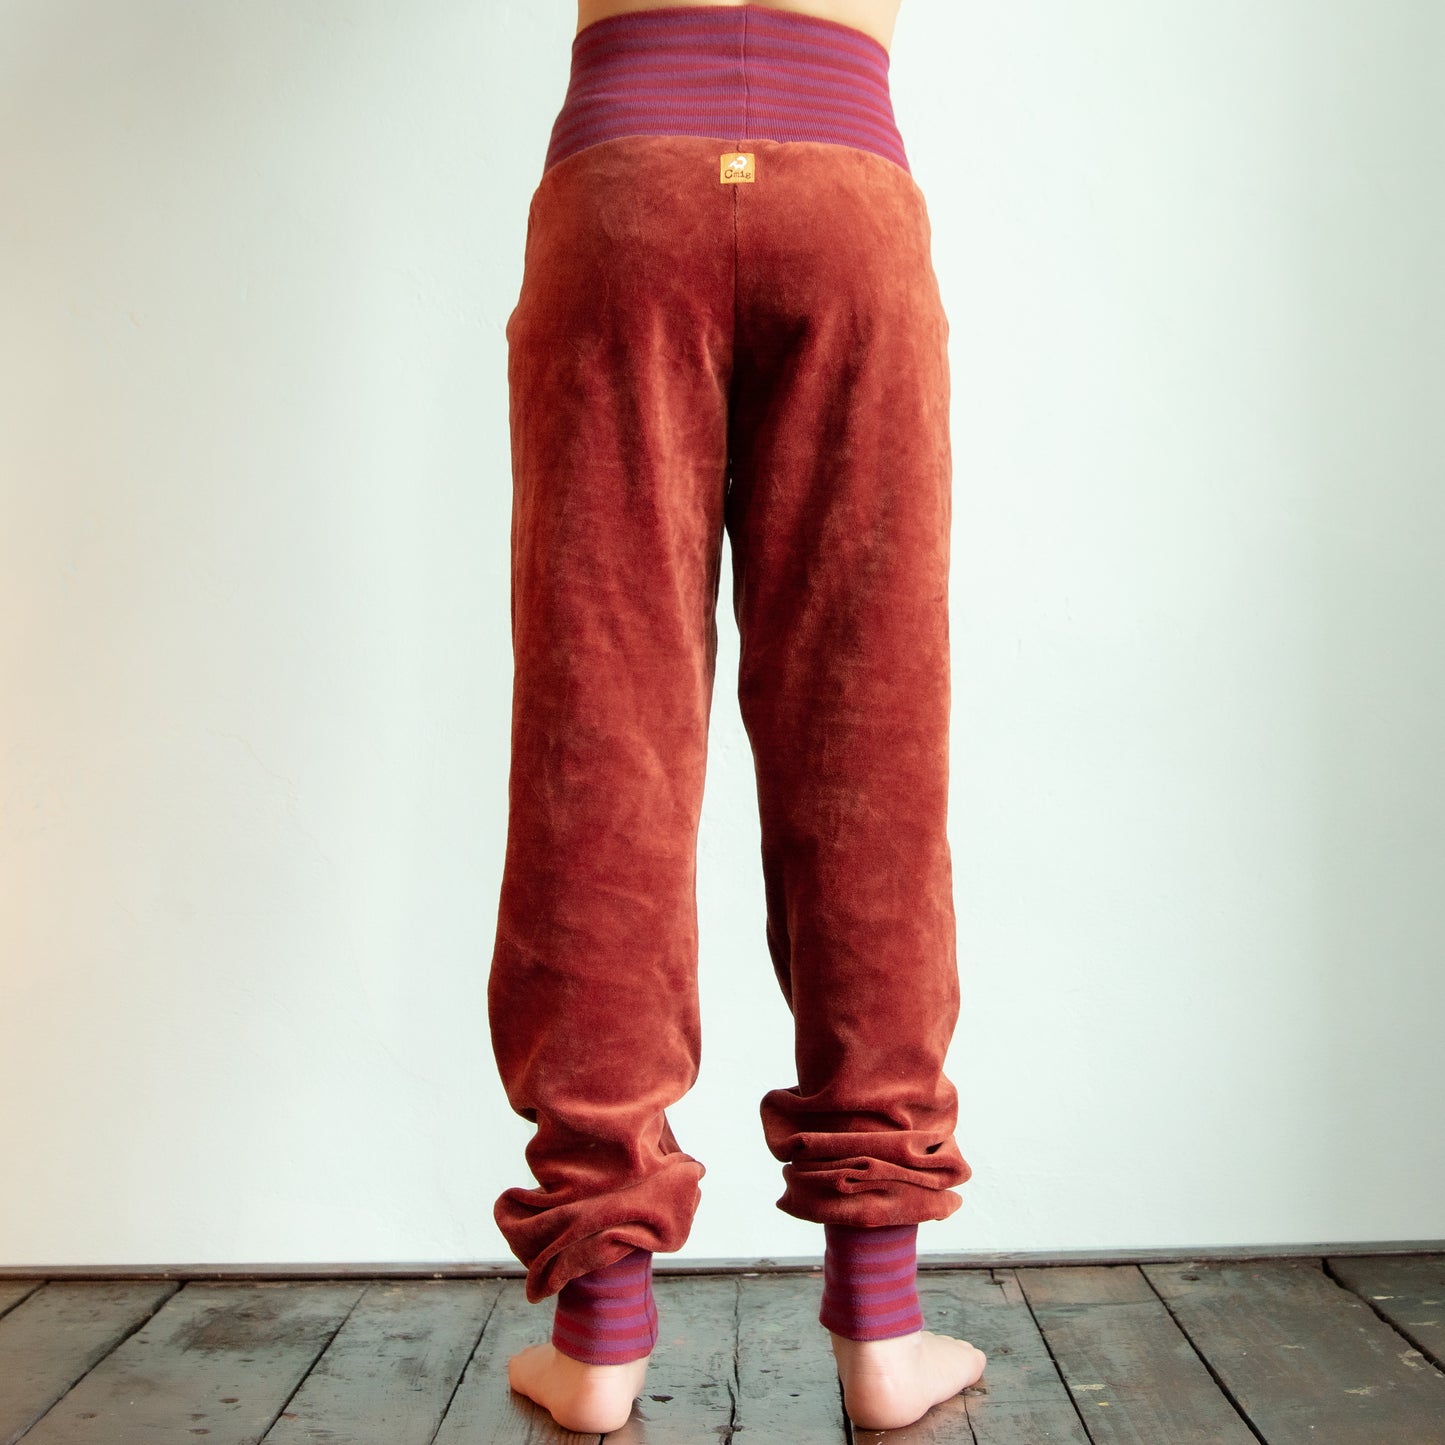 Kinder Nickihose in rost / rot-lila 92 -128